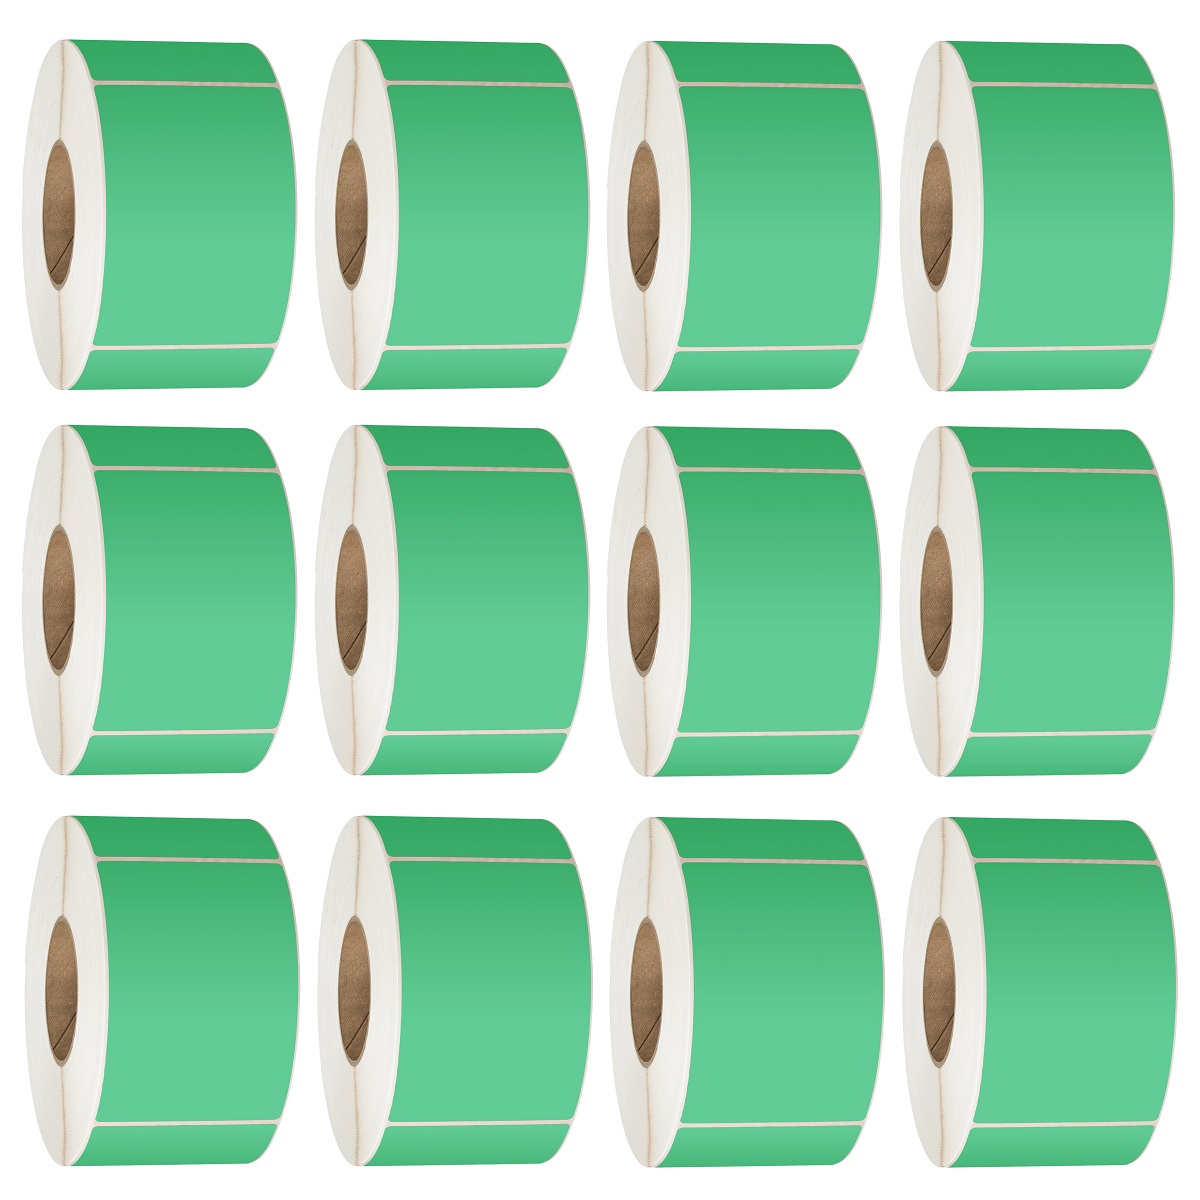 76X48 Thermal Transfer Labels 3000/Roll 76mm Core Green - 12 Rolls